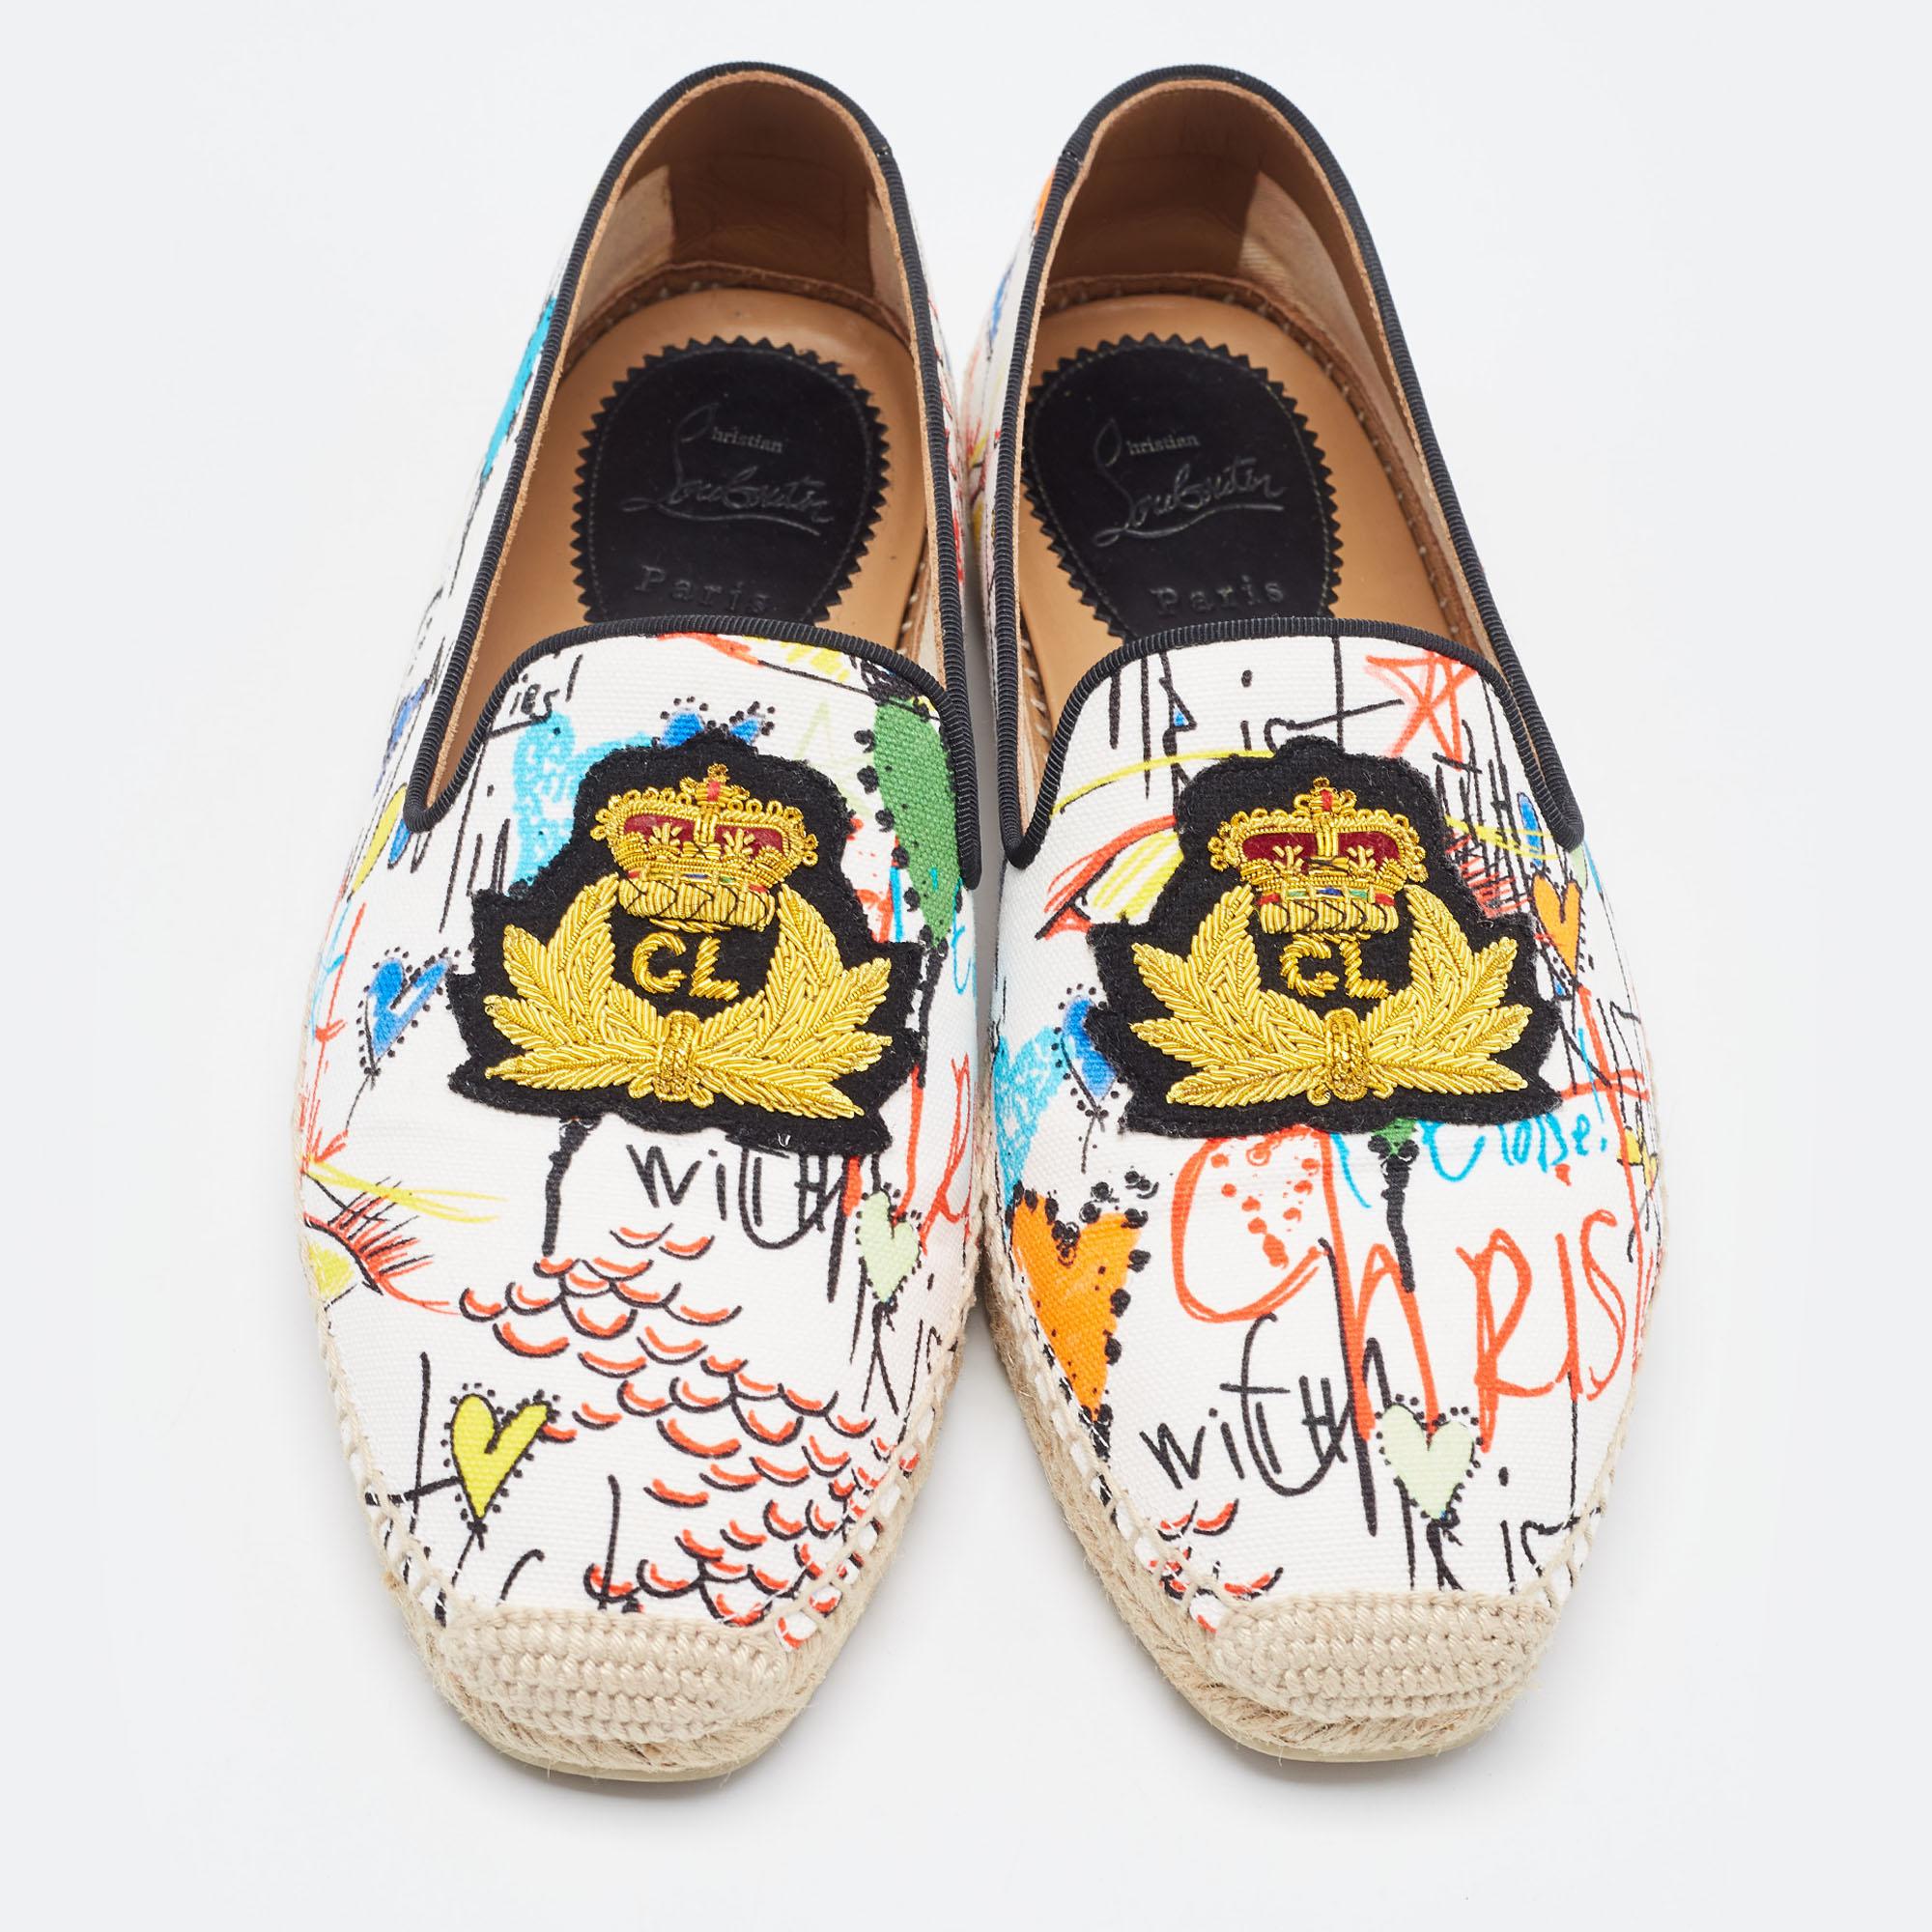 These designer espadrilles by Christian Louboutin will be your favorite go-to pair for off-duty looks. Crafted using canvas, the shoes have covered toes, prints on the exterior, and red rubber soles.

Includes: Original Dustbag, Original Box

